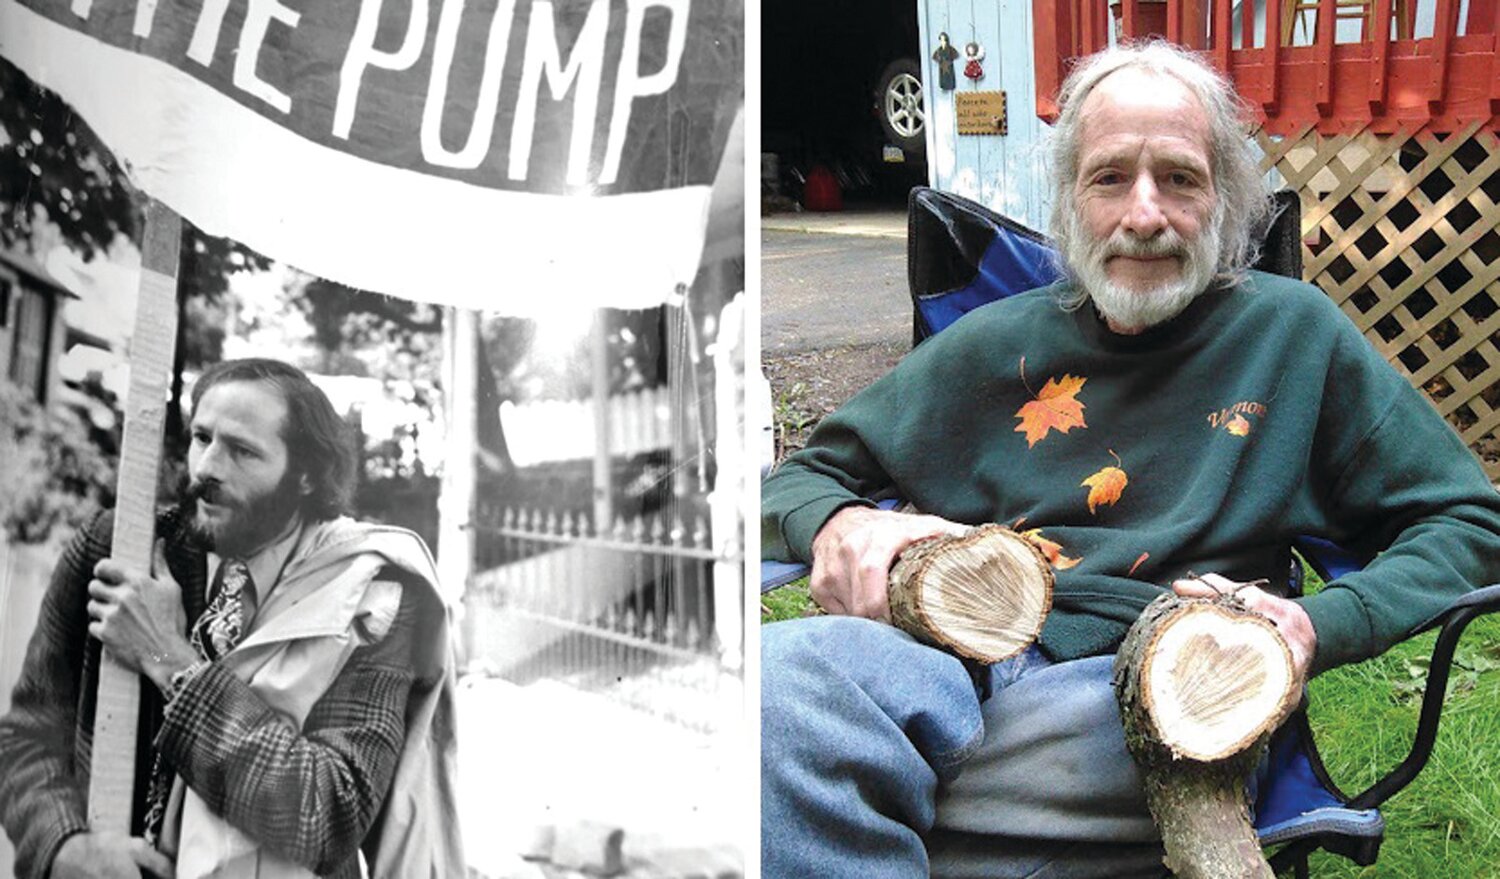 Longtime Plumsteadville resident and clean water advocate Richard “The River Man” McNutt’s life will be celebrated on June 22 at 5 p.m. at Point Breeze, Bordentown, N.J. following the 29th Delaware River Sojourn.